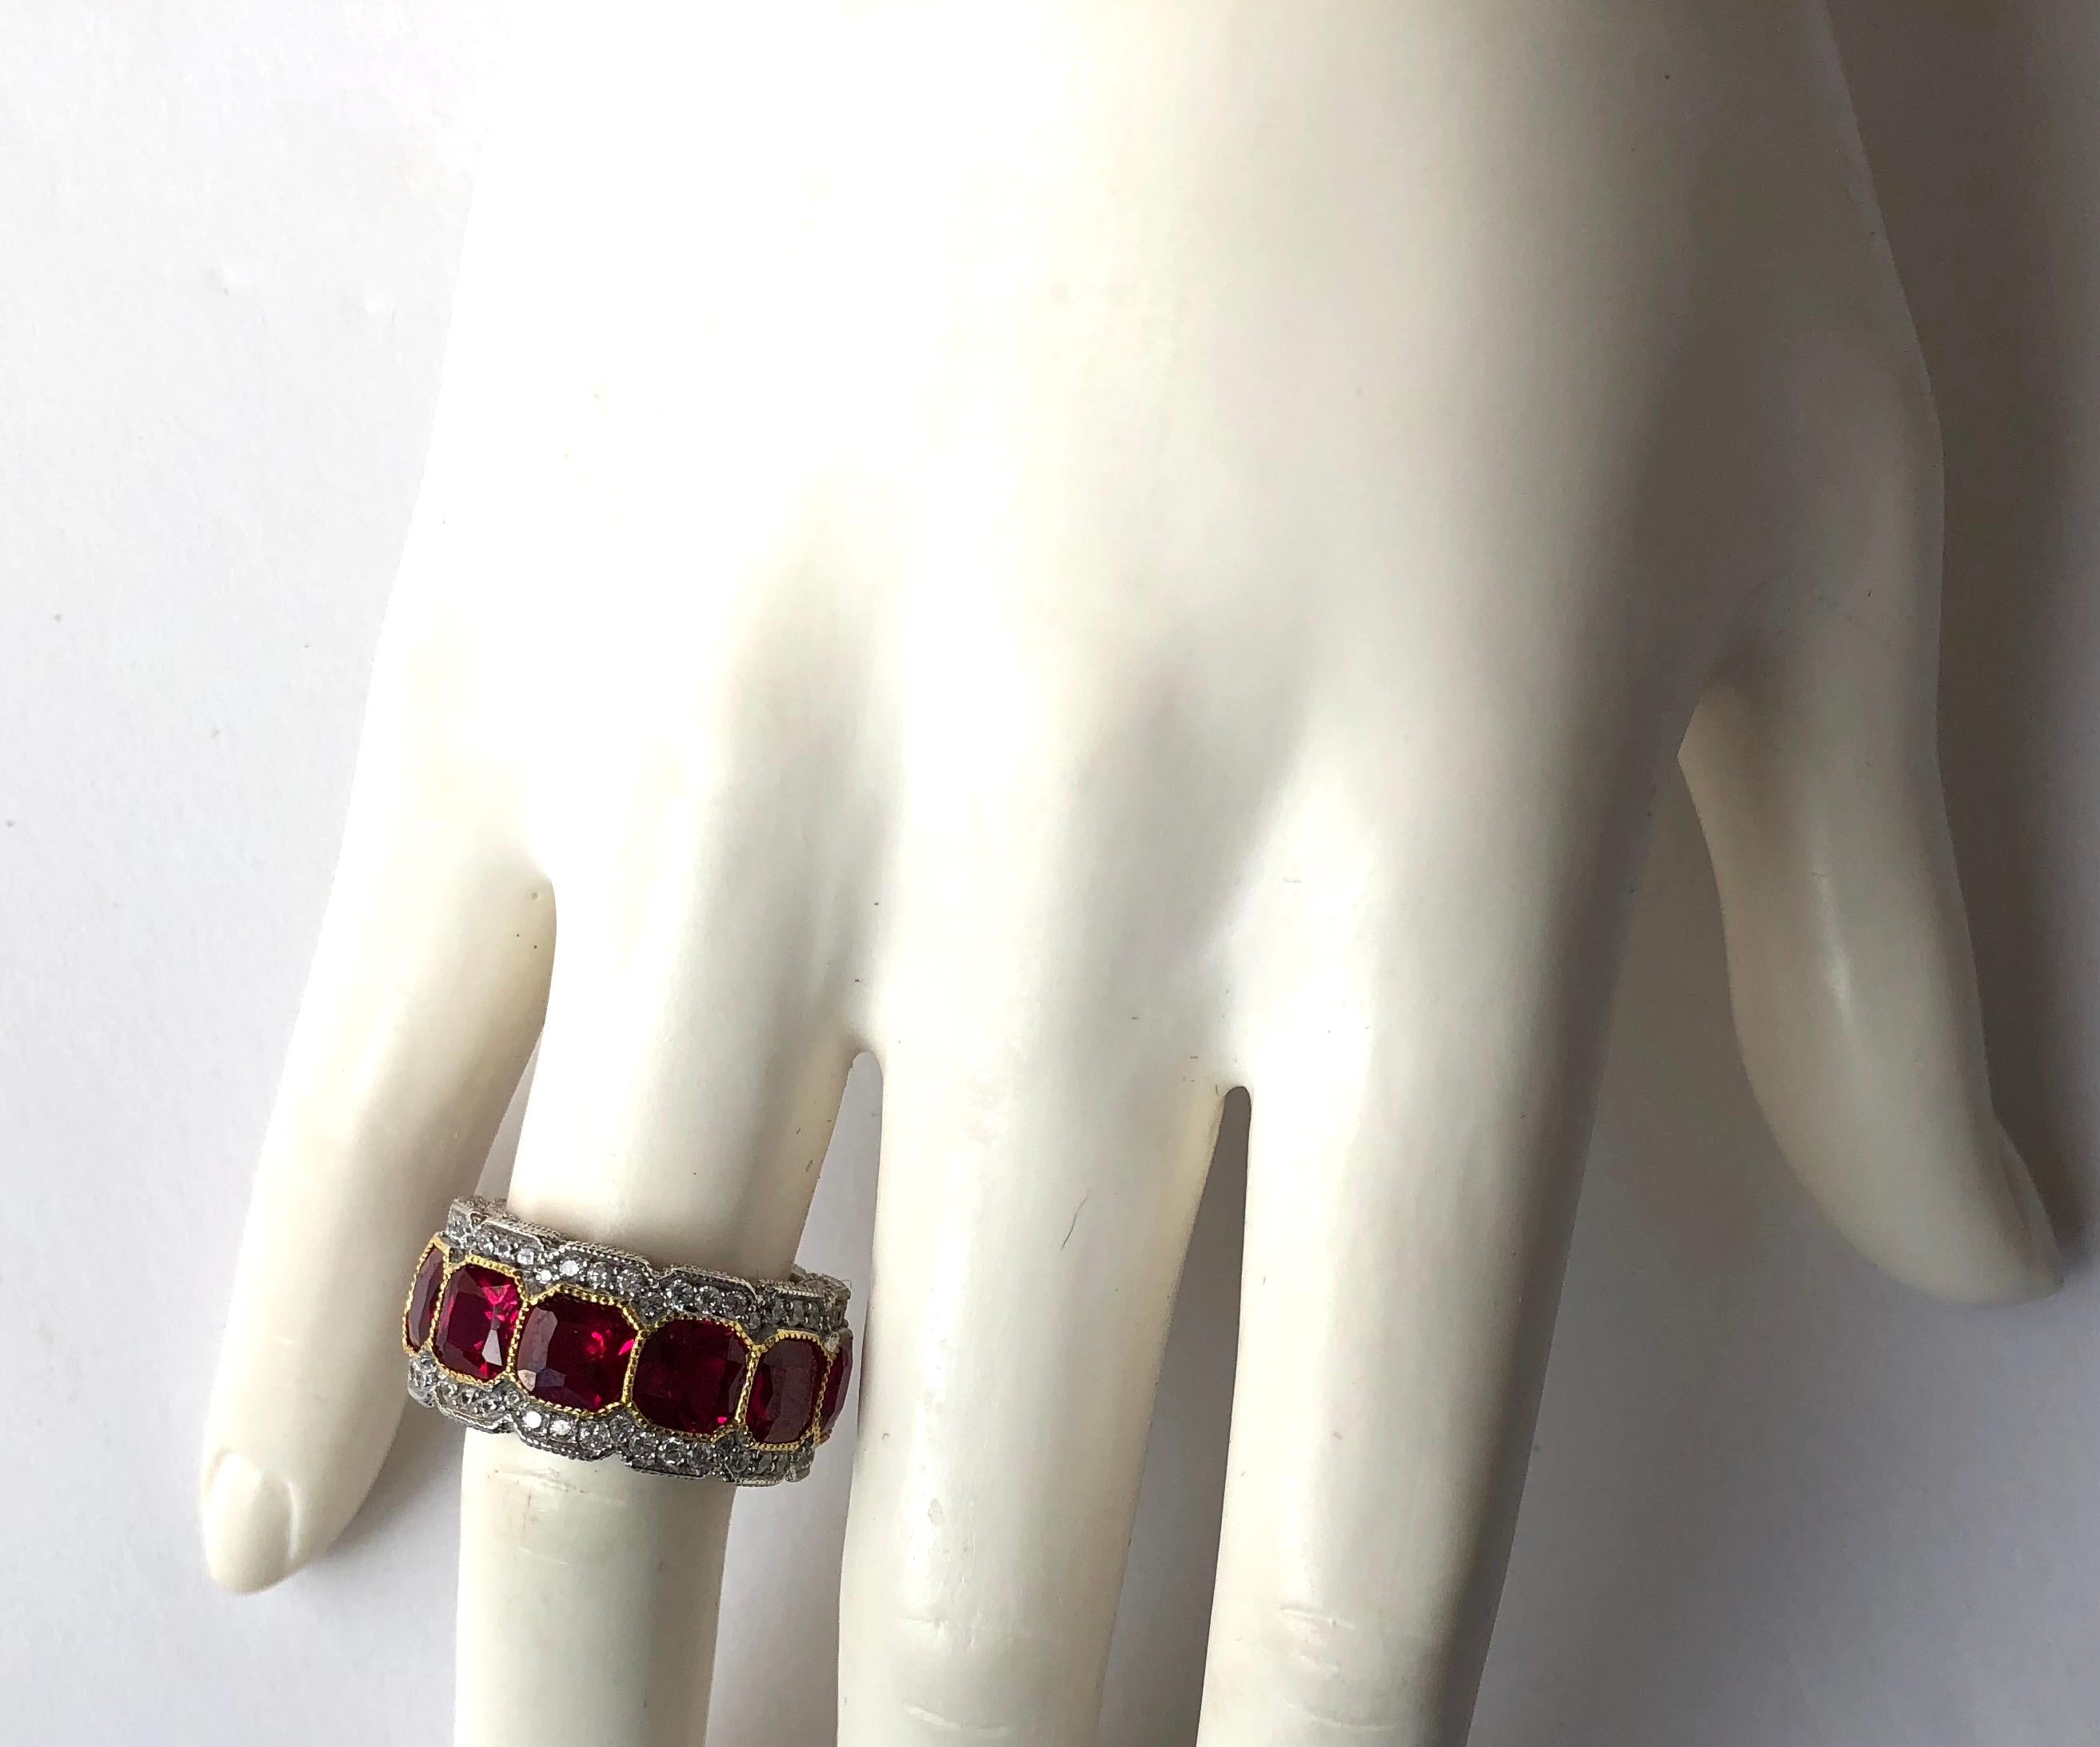 Stunning Faux Ruby Cubic Zirconia Half Inch Wide Band (Art déco)